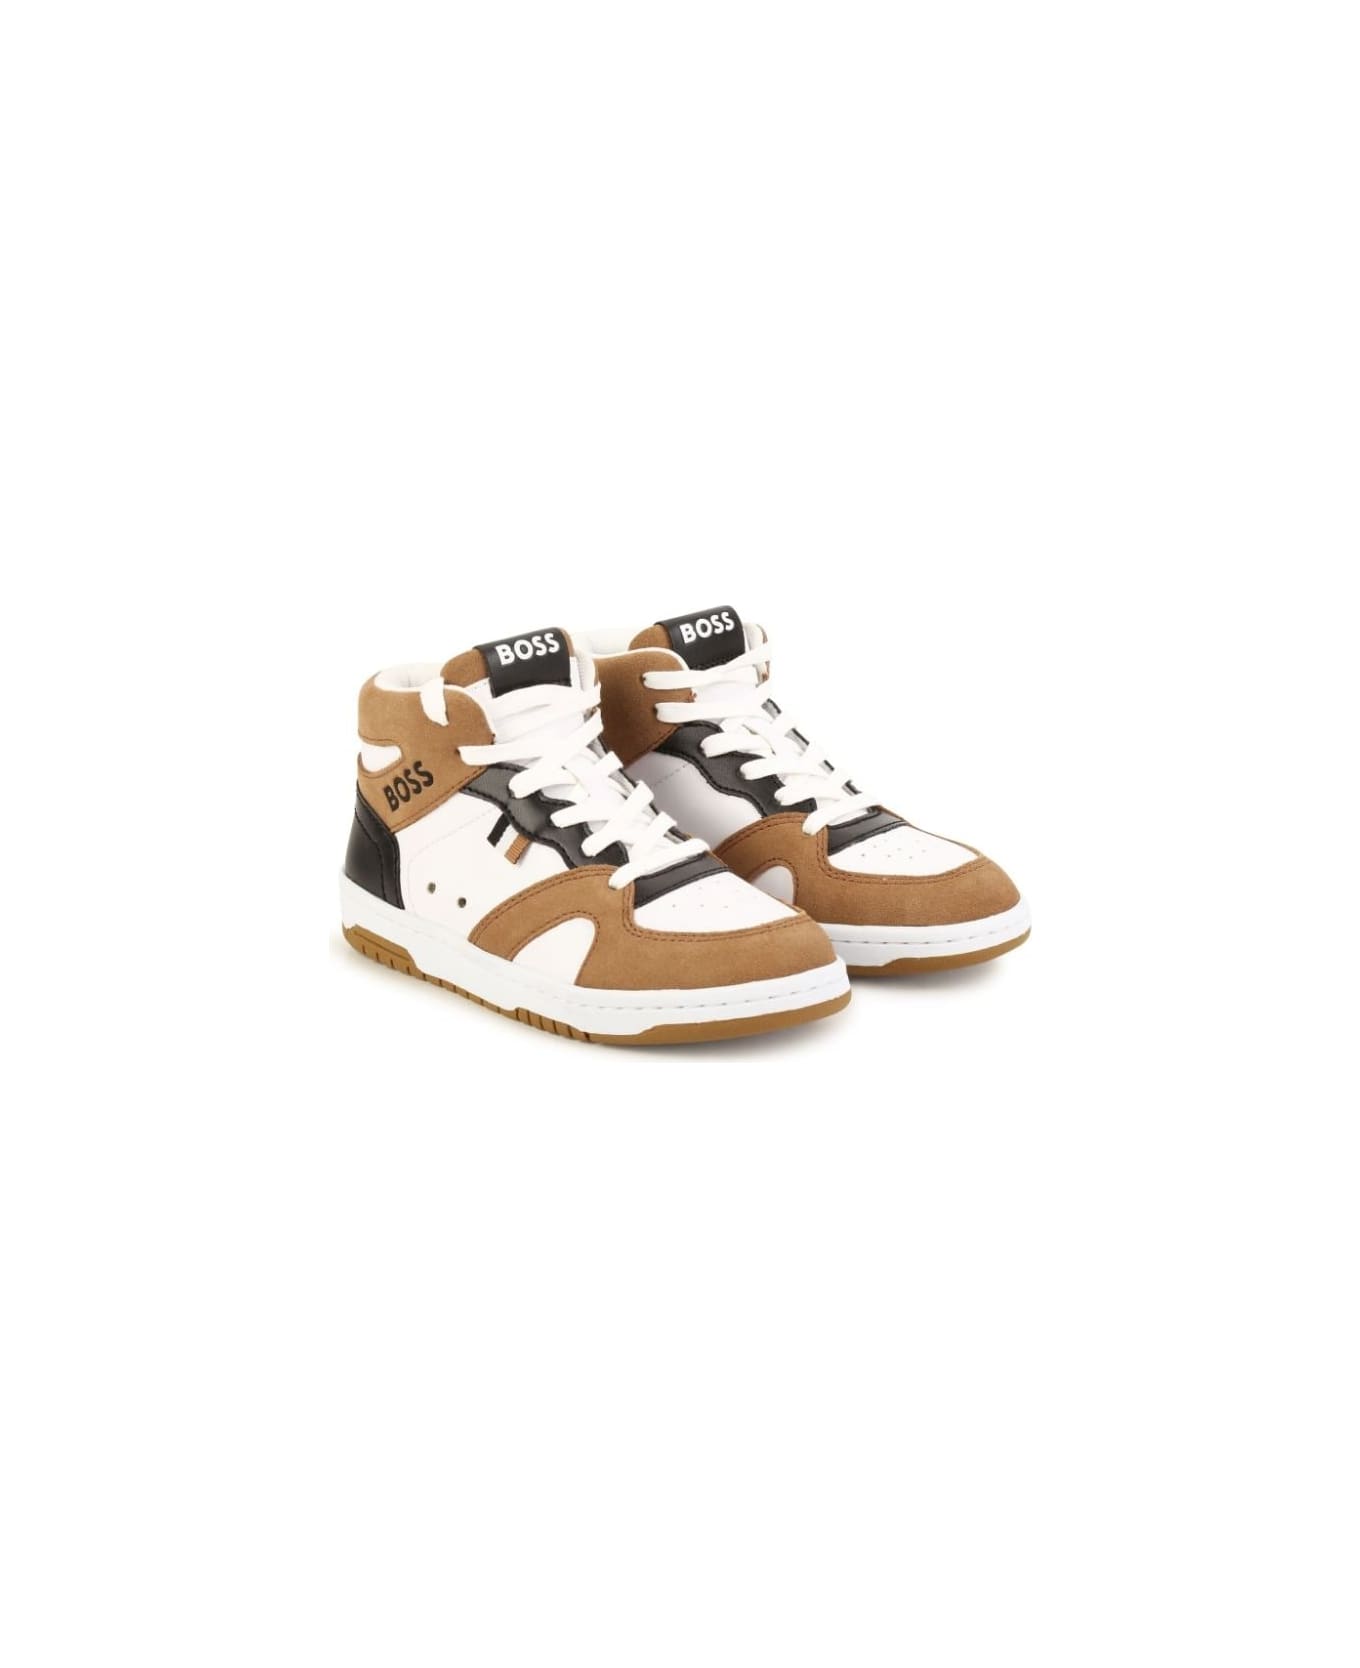 Hugo Boss Multicolor Sneakers For Kids With Logo - Multicolor